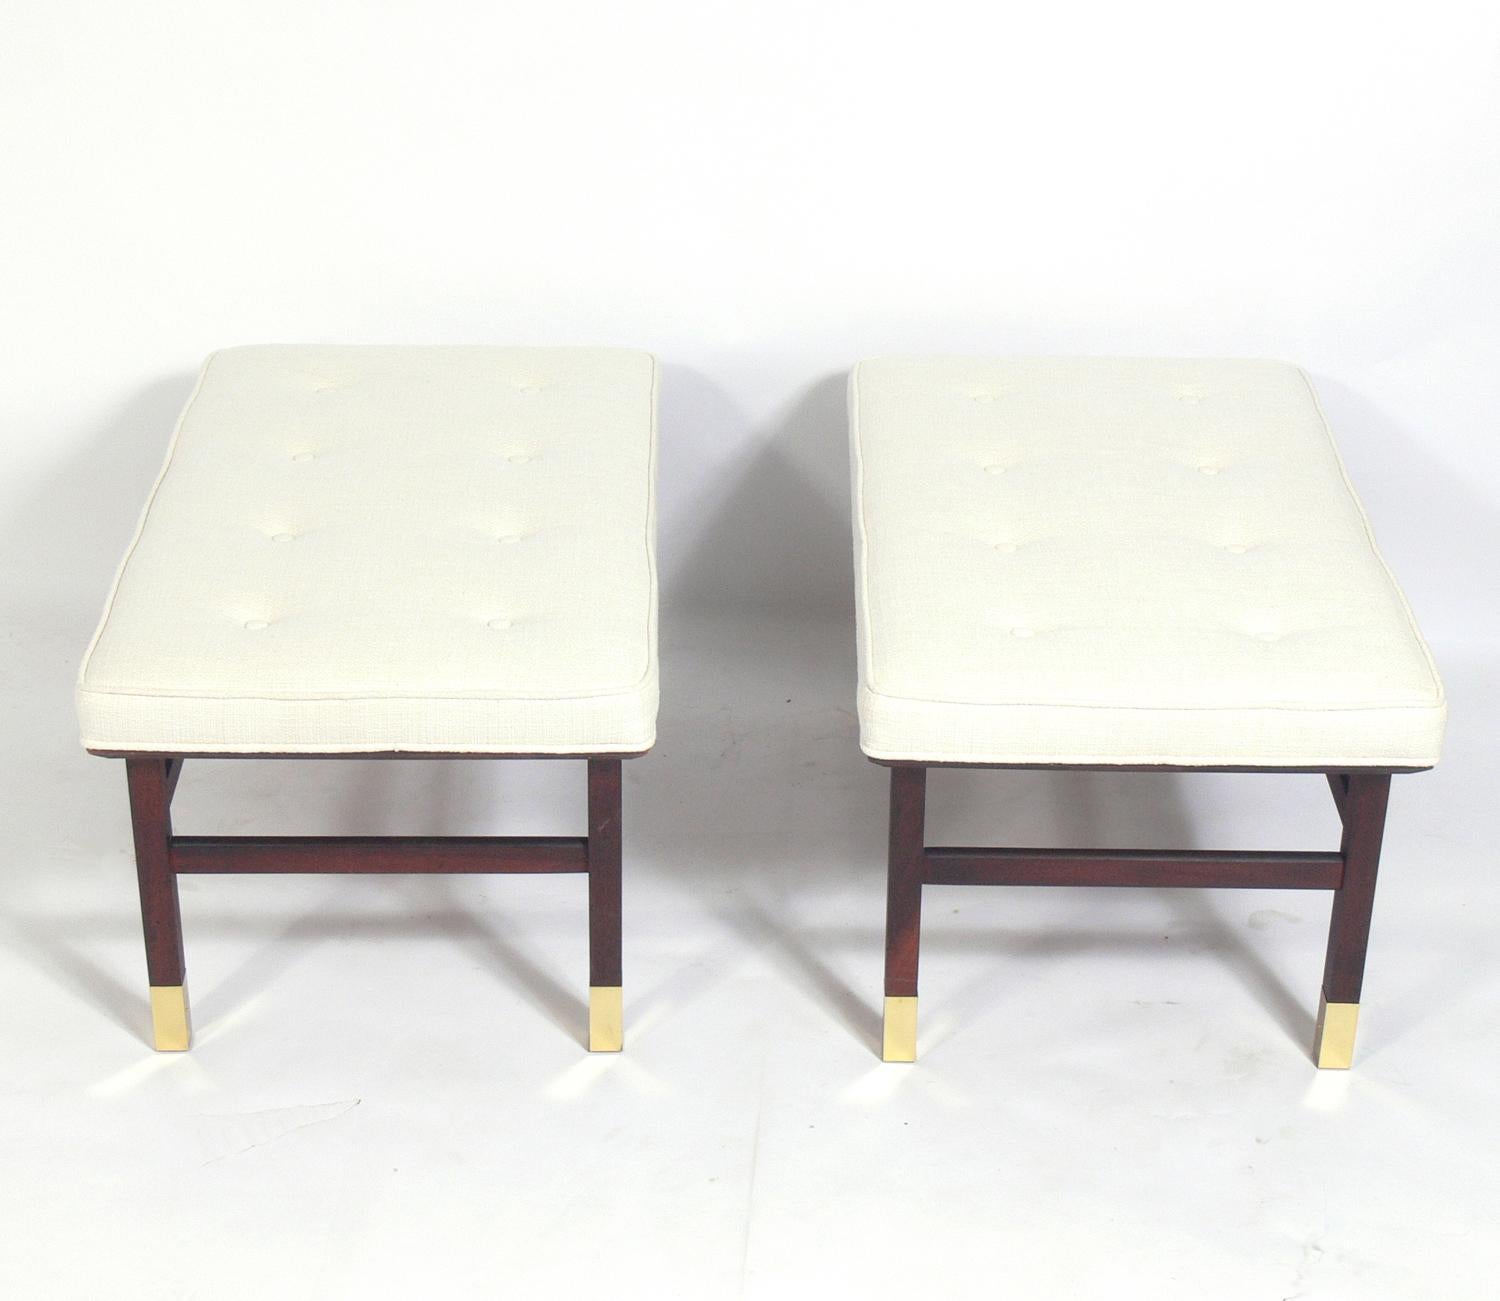 Midcentury bench, attributed to Harvey Probber, American, circa 1960s. It is constructed of walnut and brass and have been reupholstered in an ivory color linen style fabric. They are priced at $1600 each. One has been SOLD. 